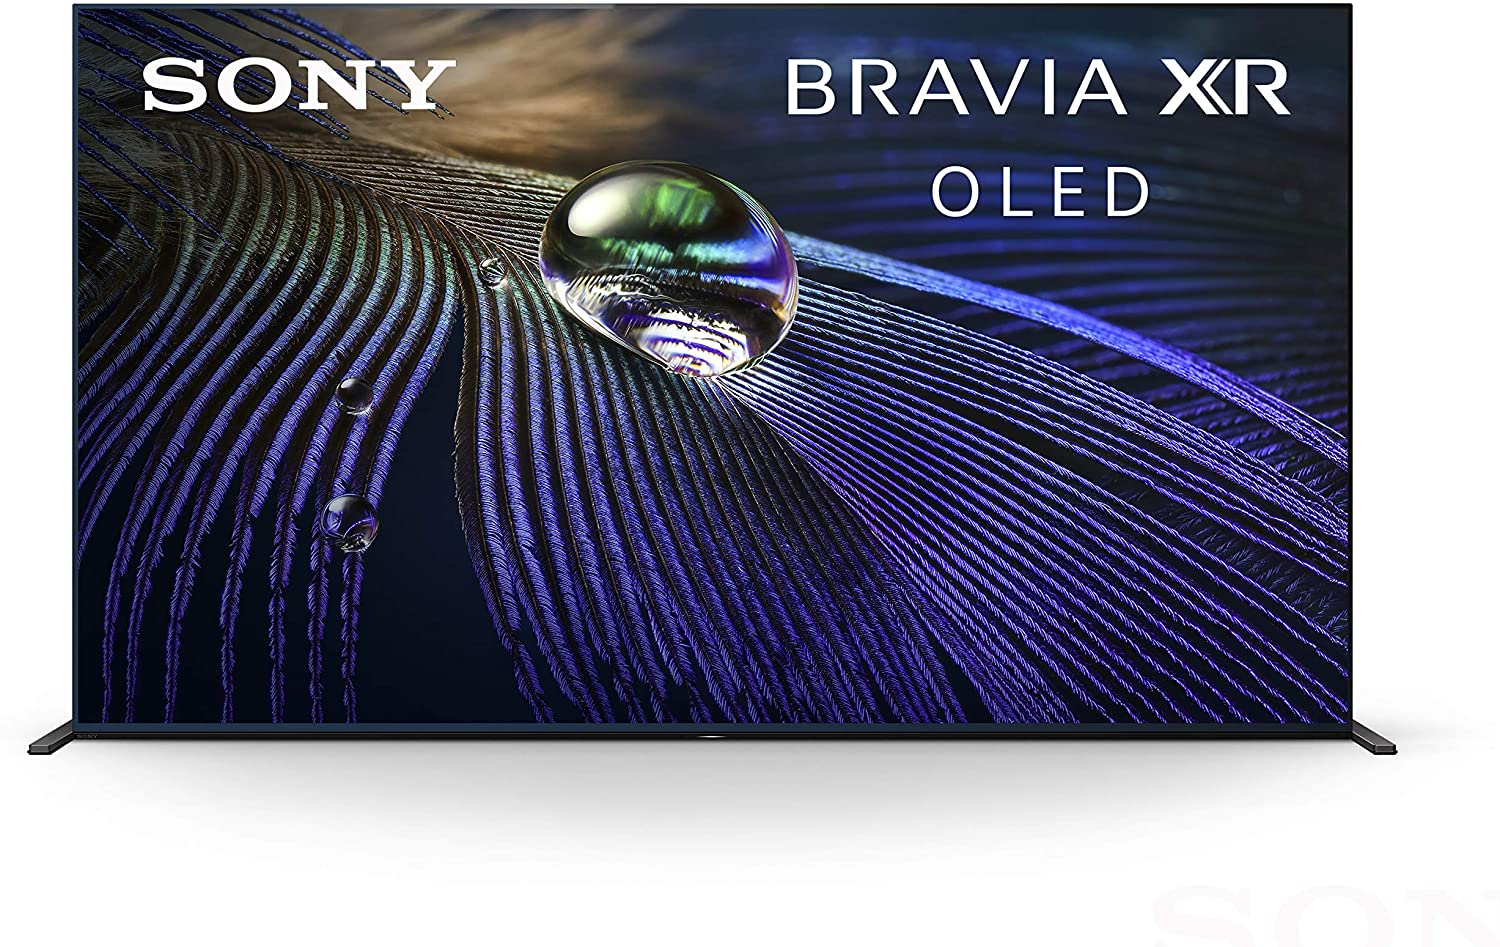 Sony A90J 65 Inch TV: BRAVIA XR OLED 4K Ultra HD Smart Google TV with Dolby Vision HDR and Alexa Compatibility (XR65A90J)4